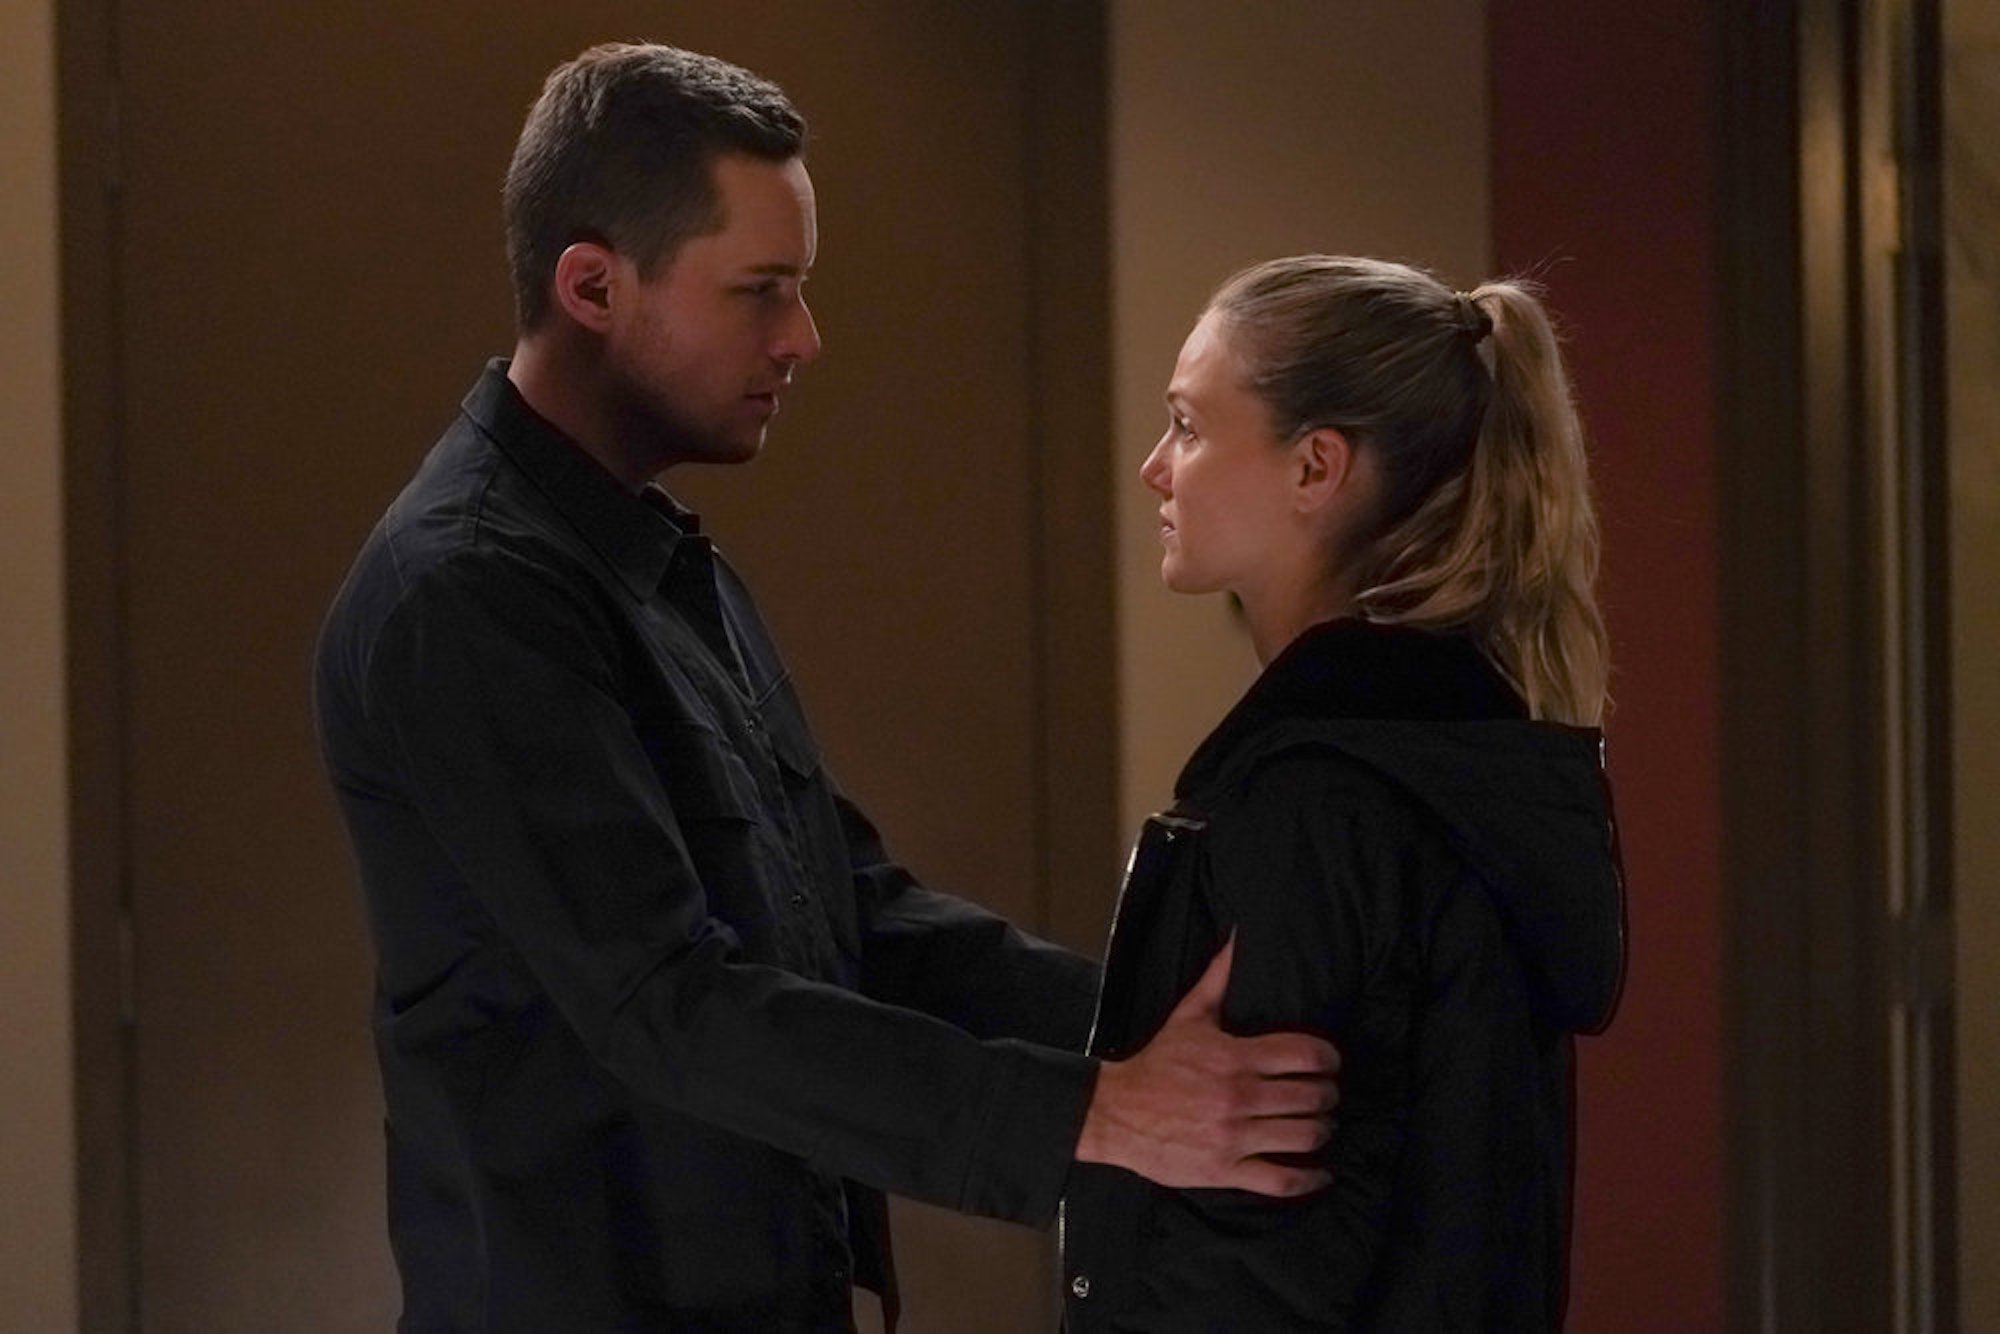 Jay Halstead and Hailey Upton in 'Chicago P.D.' Season 9. 'Chicago P.D.' Season 9 spoilers note Halstead finally confronts Upton about Roy's death.